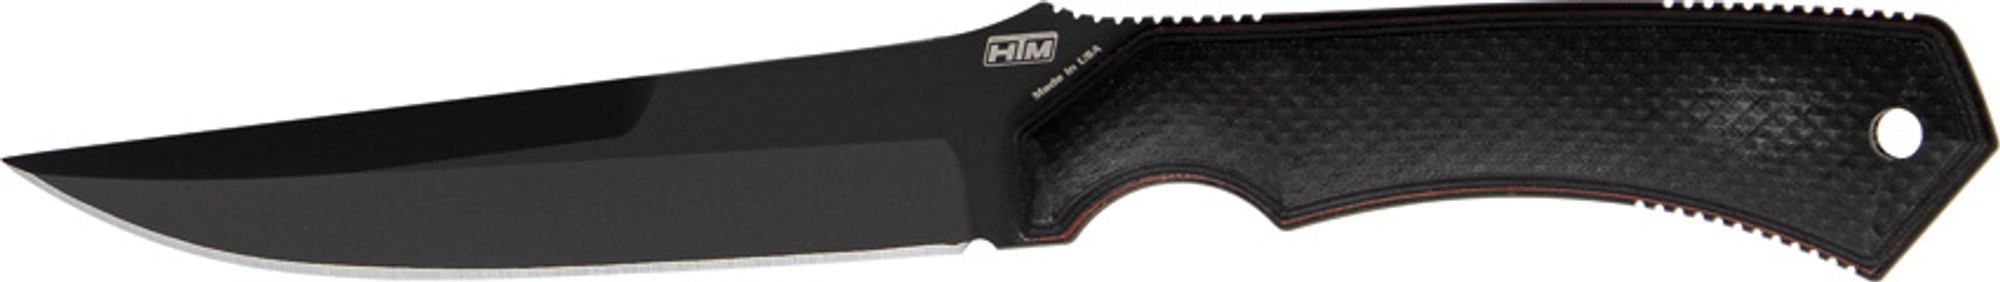 HTM Randall King 99891 Tactical Black Clip Point